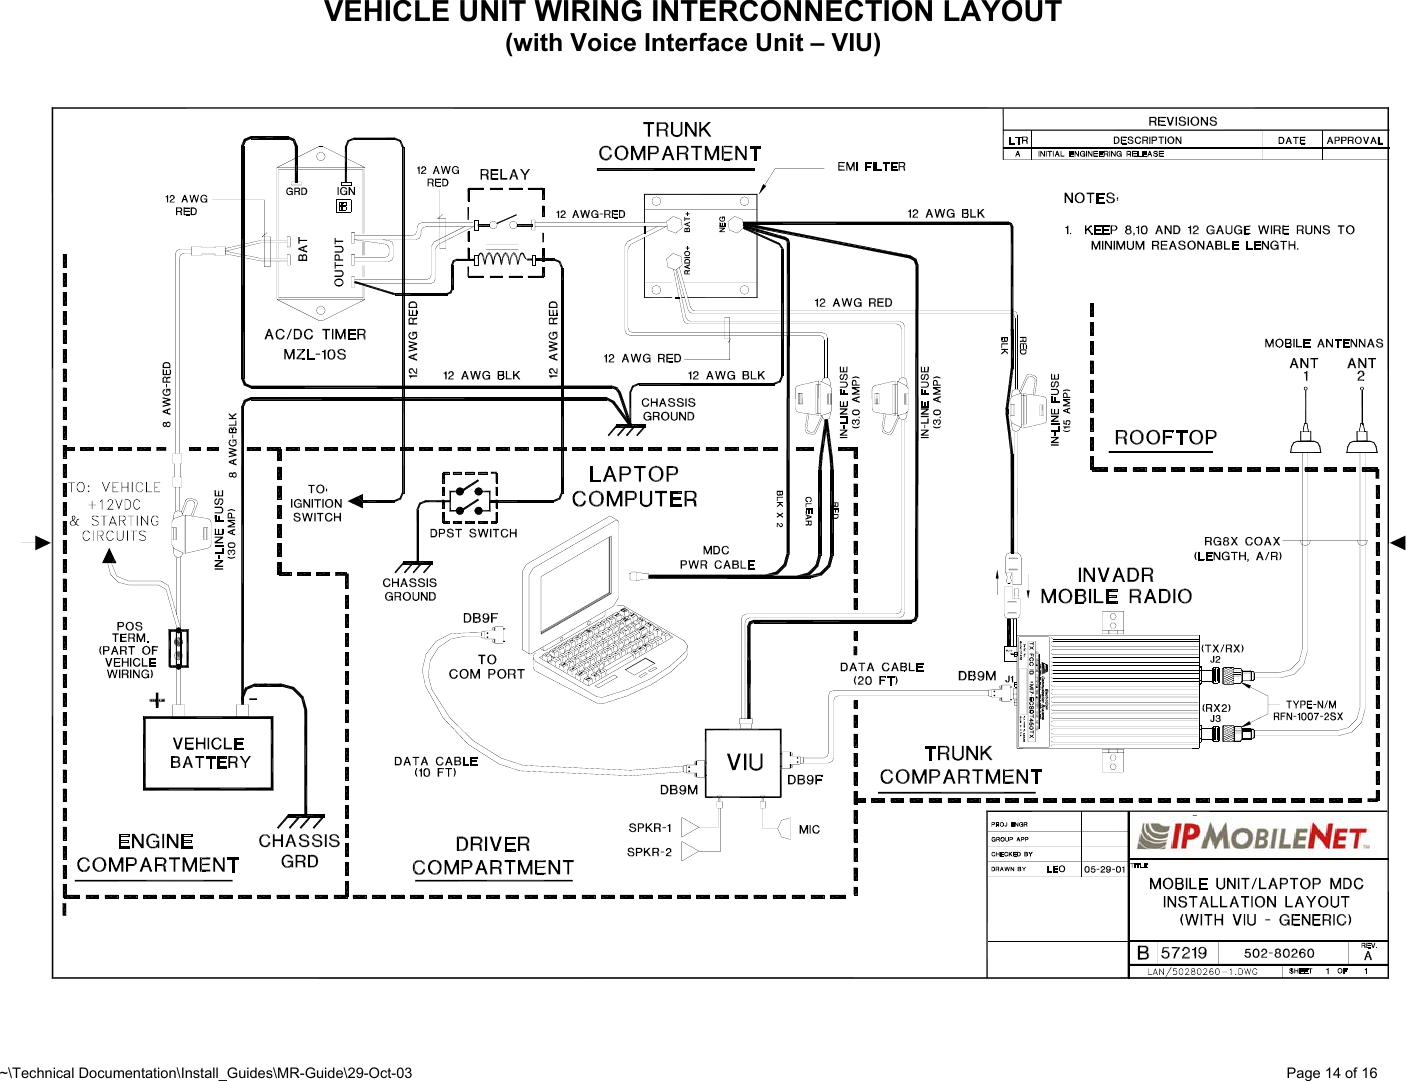 ~\Technical Documentation\Install_Guides\MR-Guide\29-Oct-03   Page 14 of 16 VEHICLE UNIT WIRING INTERCONNECTION LAYOUT (with Voice Interface Unit – VIU)                       